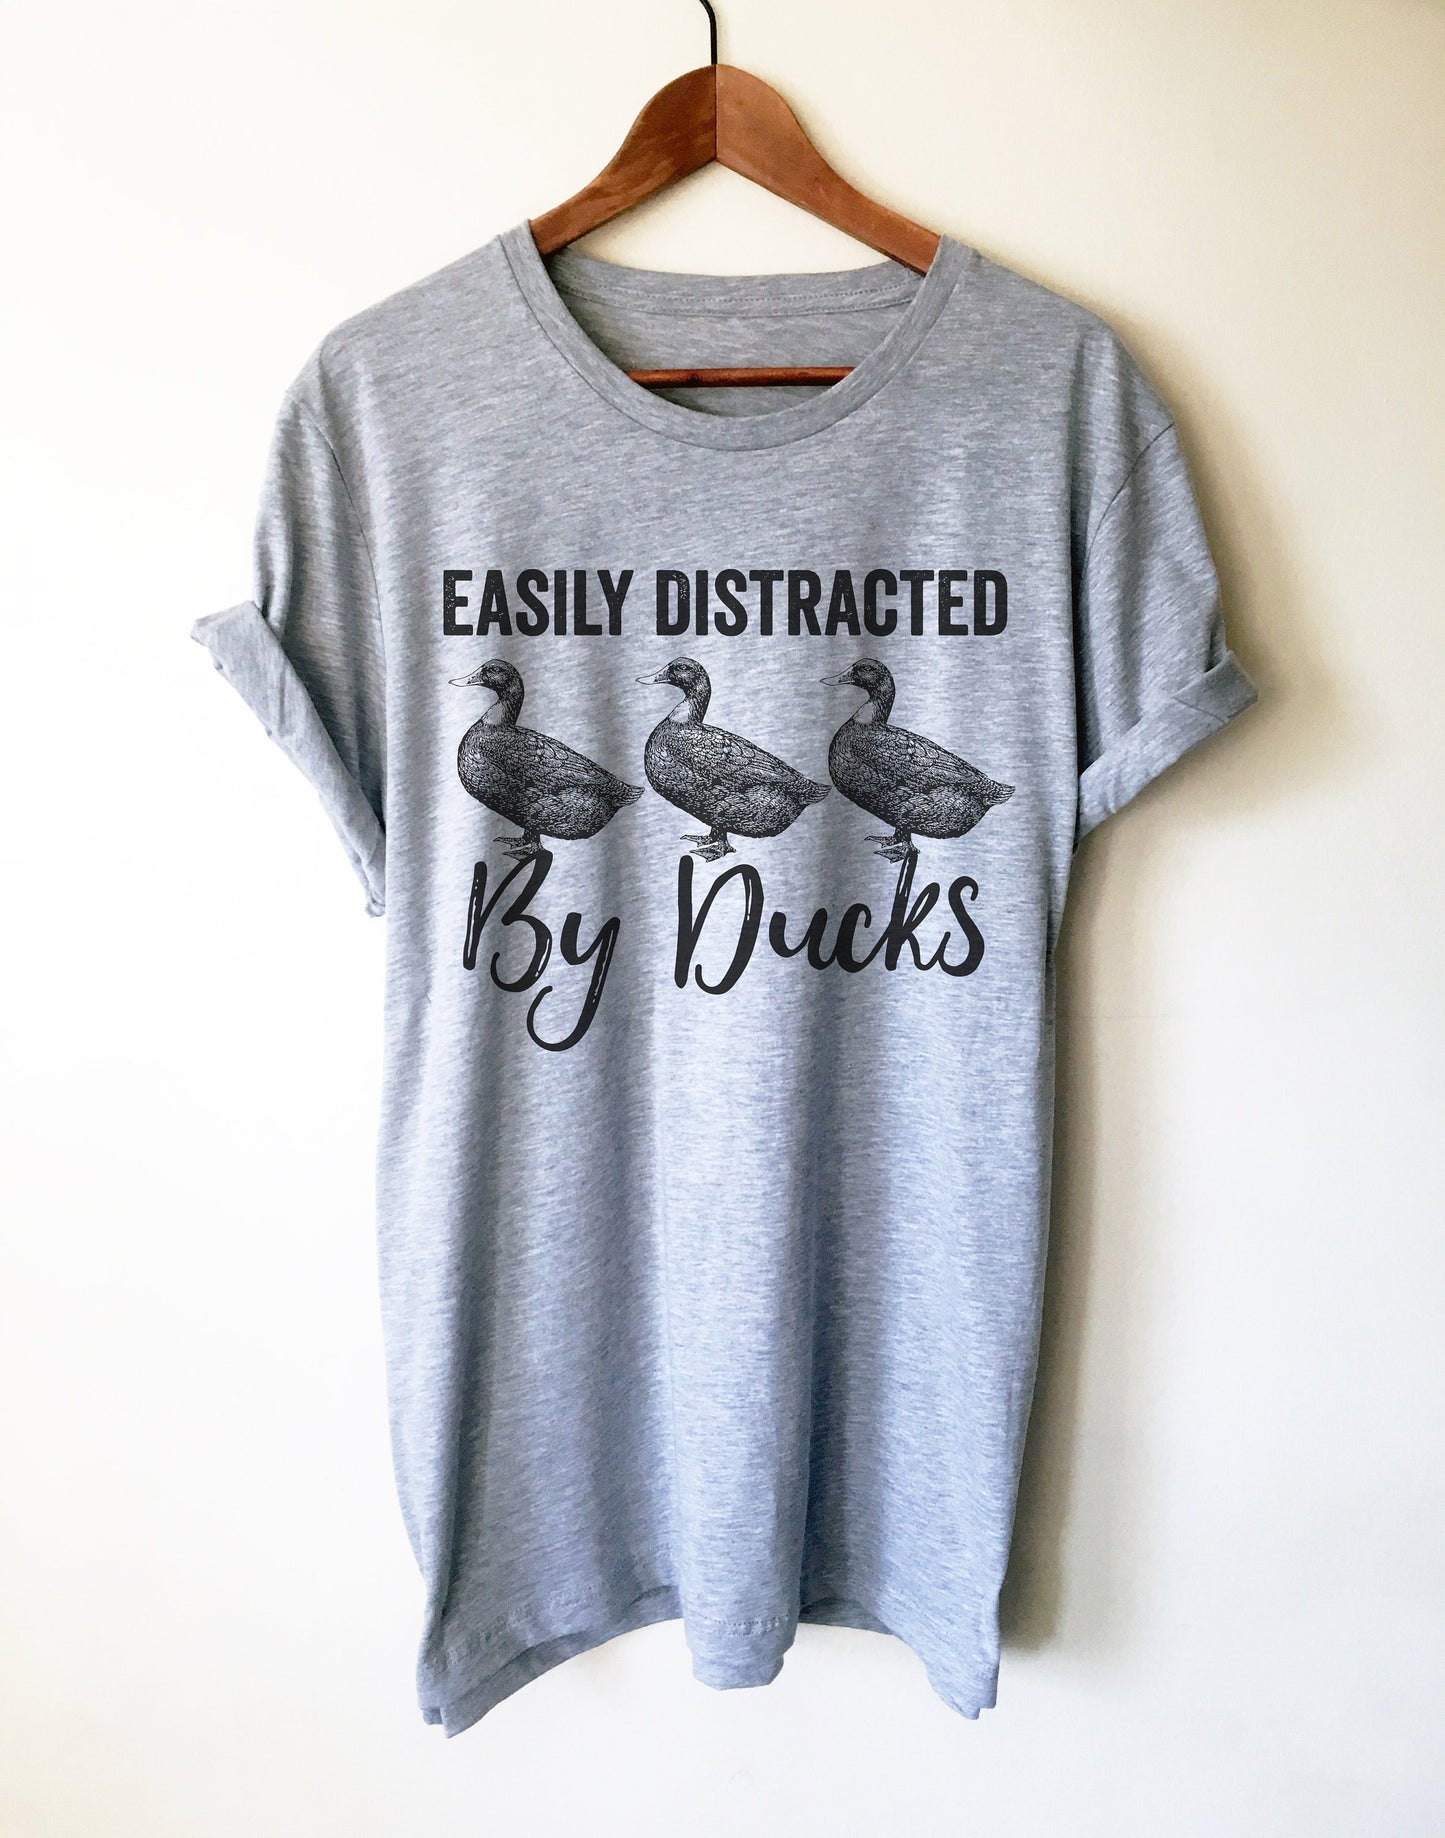 Easily Distracted By Ducks Unisex Shirt - Duck Shirt, Duck Gift, Farmer Shirt, Farmer Gift, Duck Hunting, Rubber Duck, Duck Lover Gift